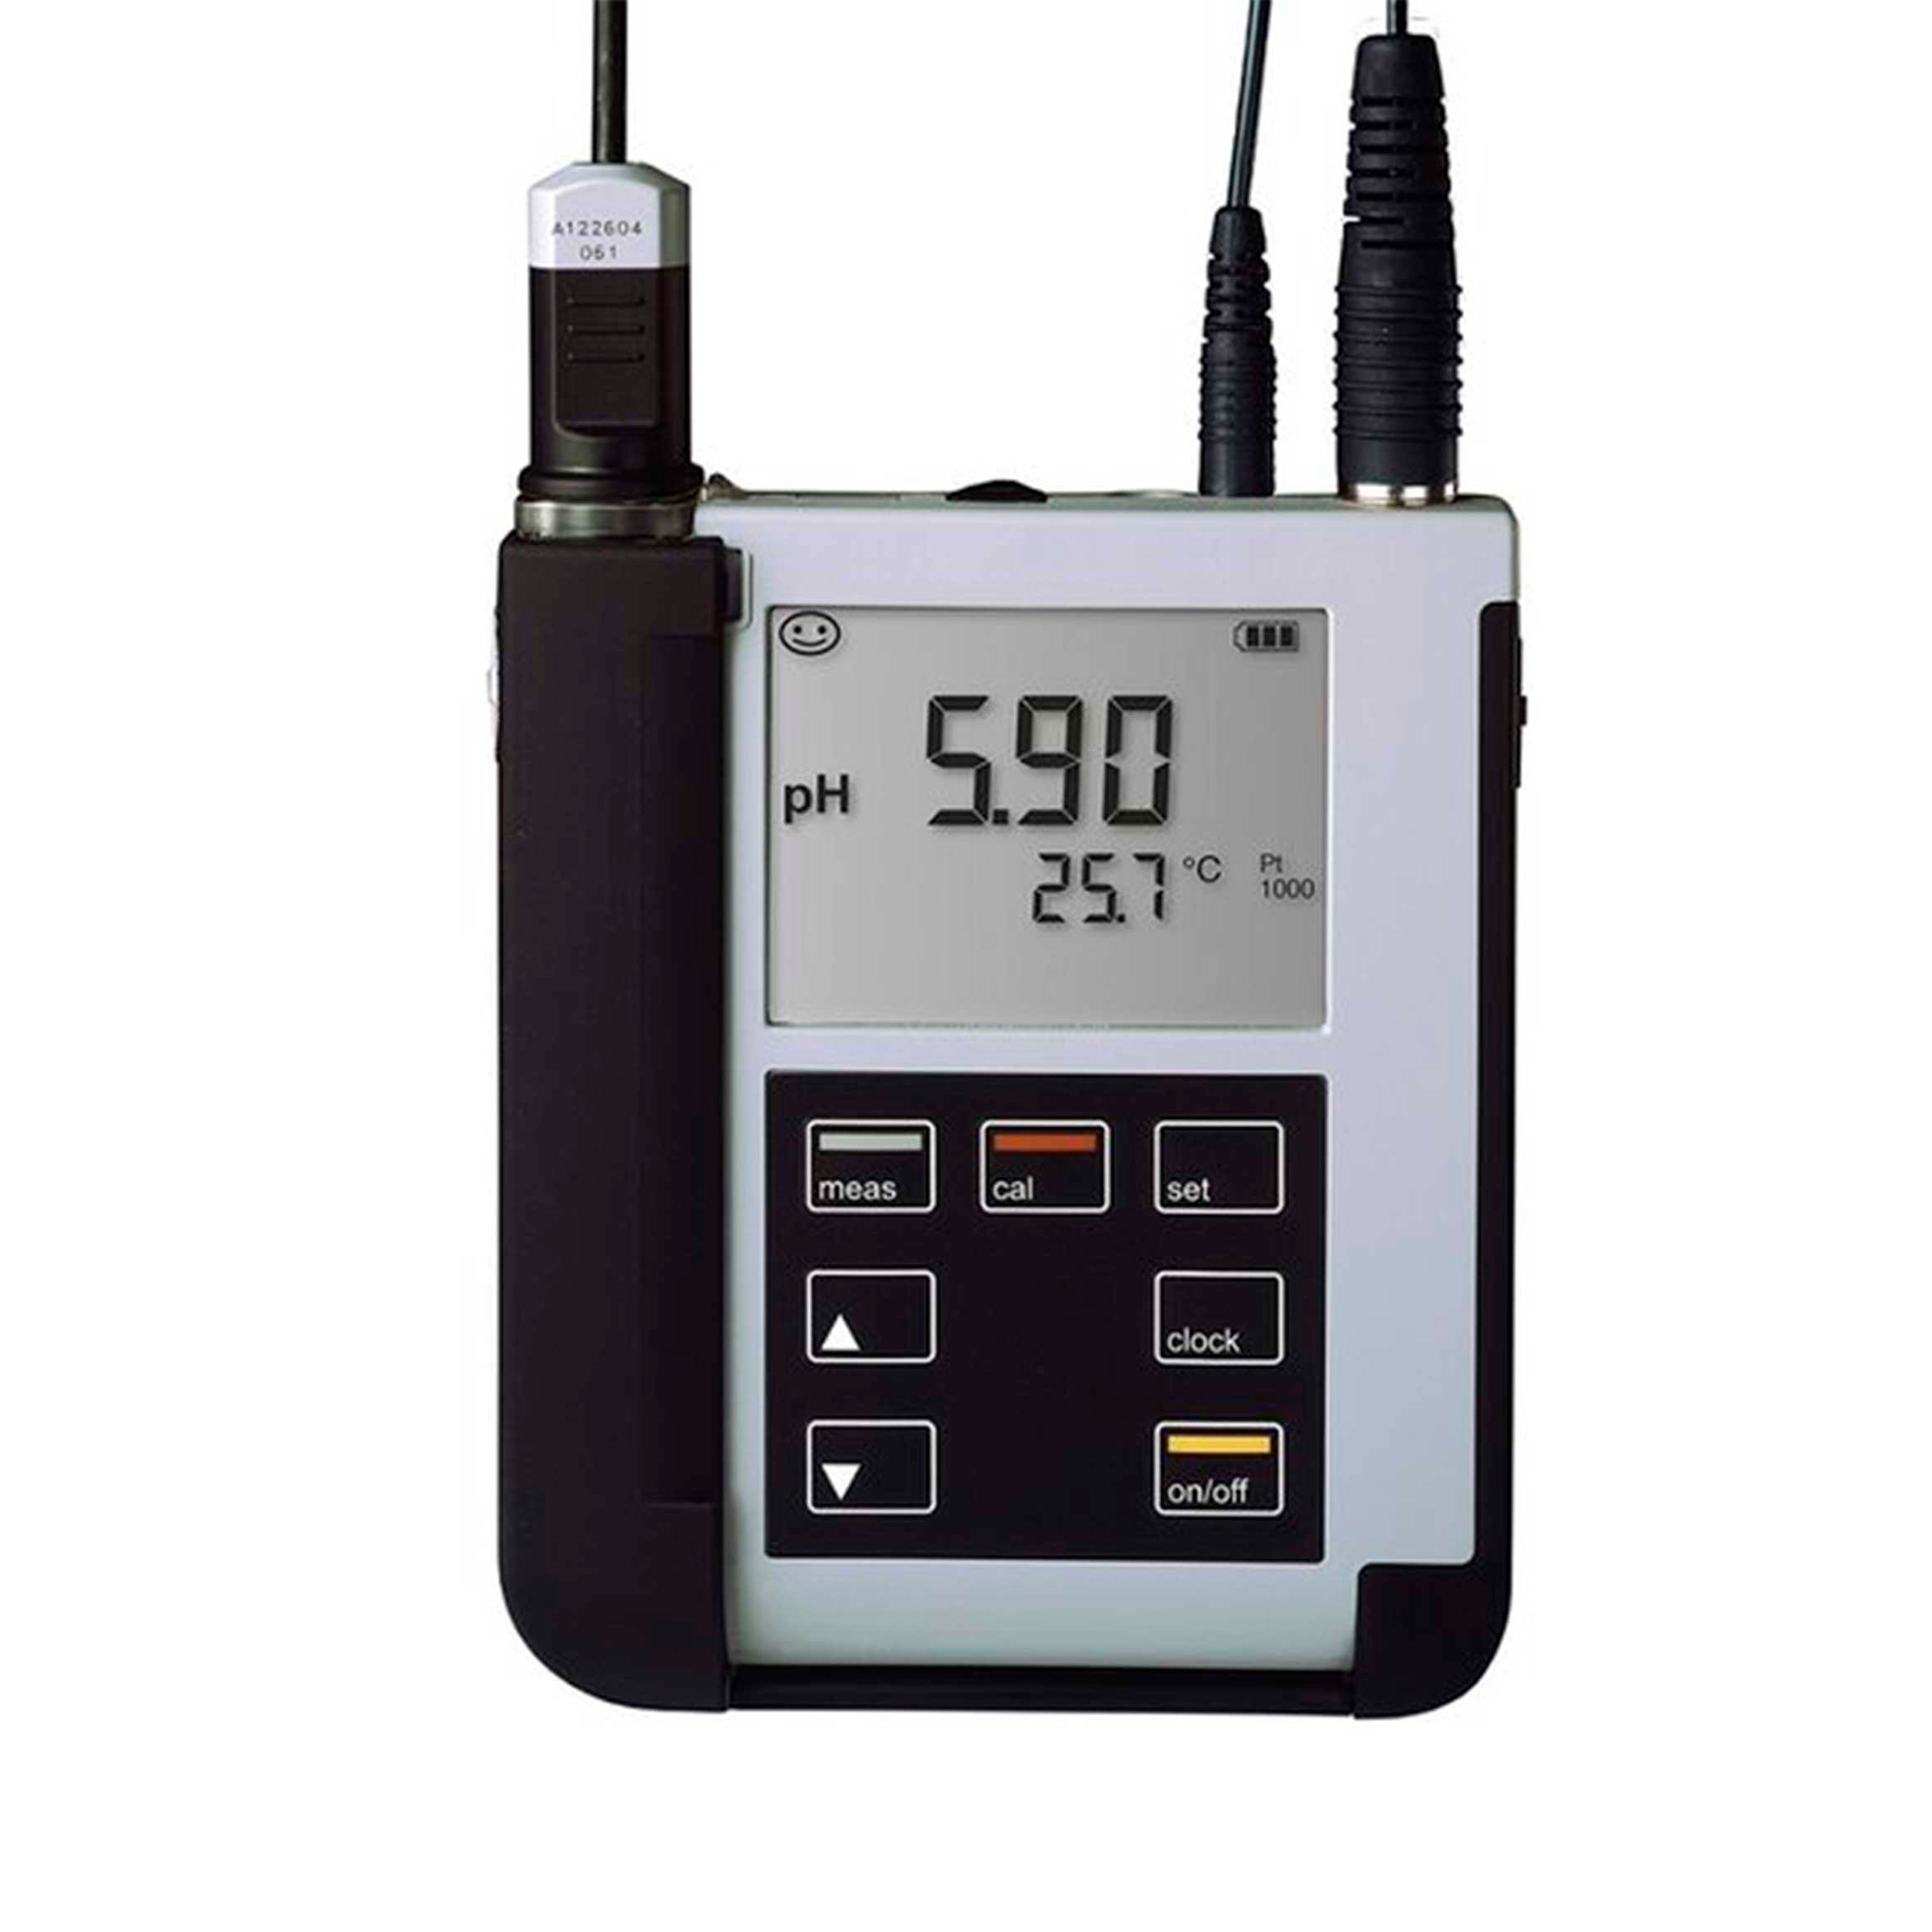 Portable multiparameters with ATEX certification